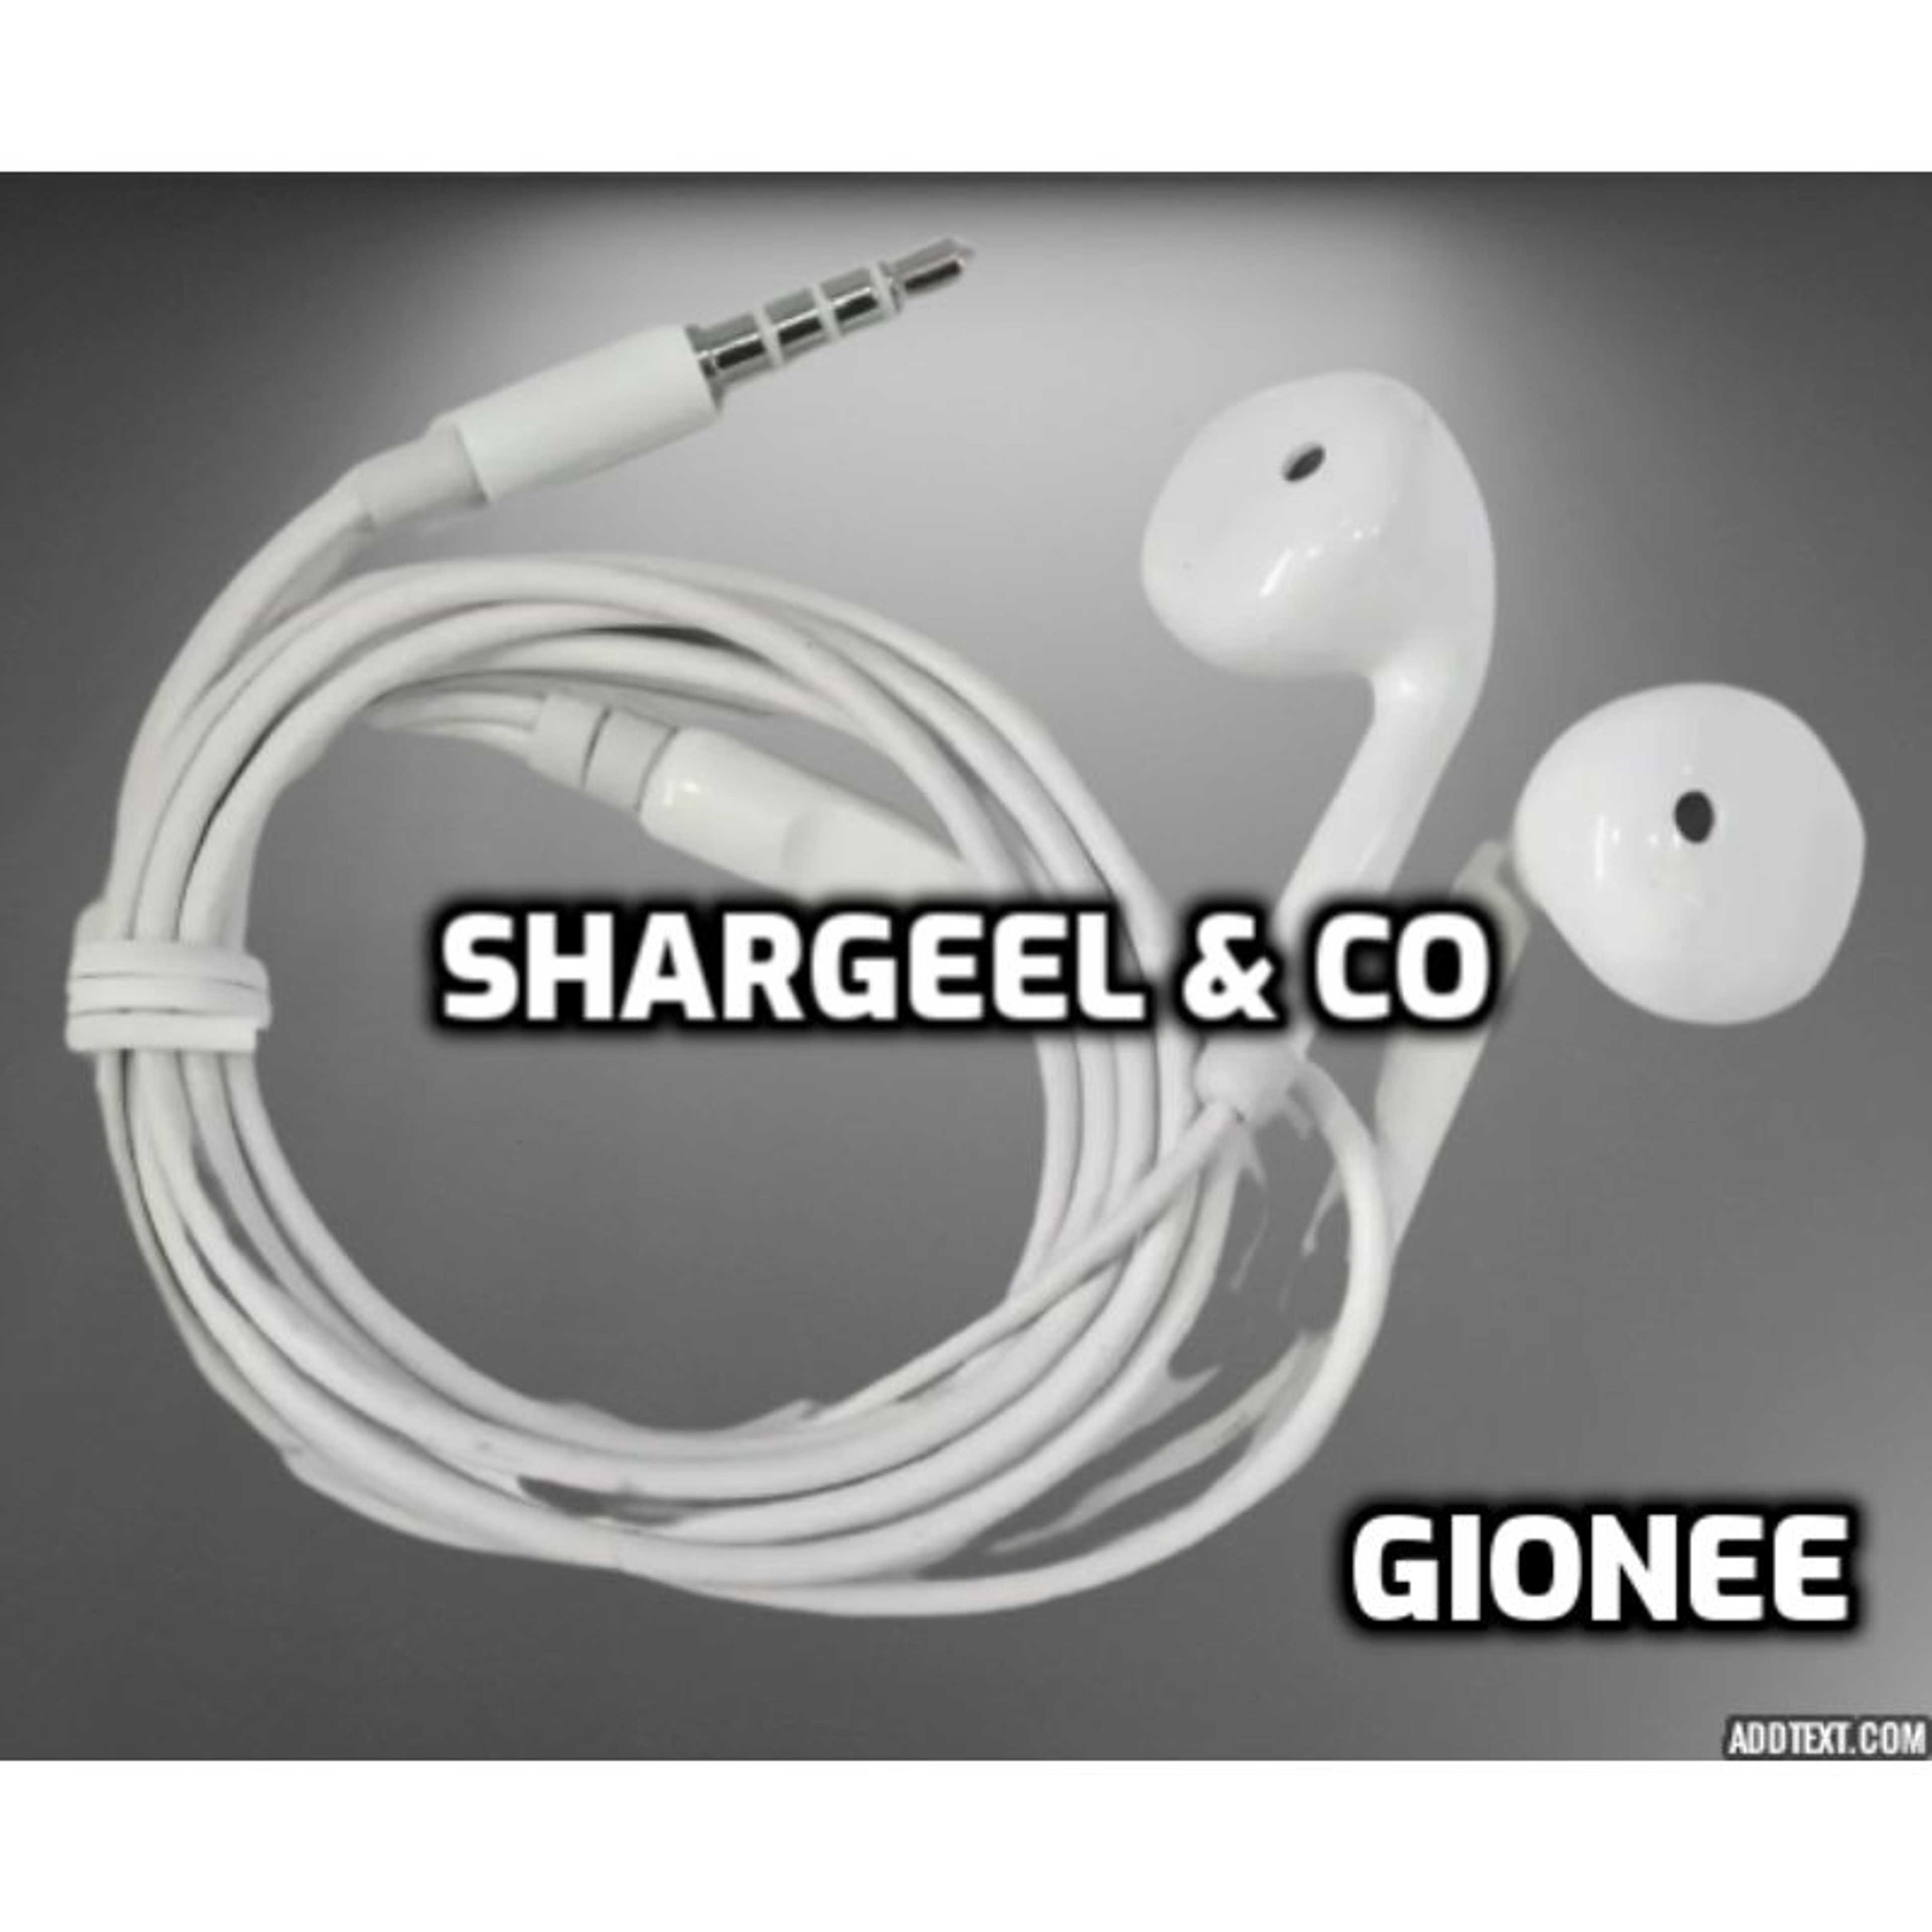 Hands-free 100% Genuine Gionee Handsfree with micro phone white color Imported/Branded, High Quality Deep stereo Bass/Sound Earphones Headphones Handfree 3.5 meter length (light weight) original headset specially designed for gaming used for all mobiles